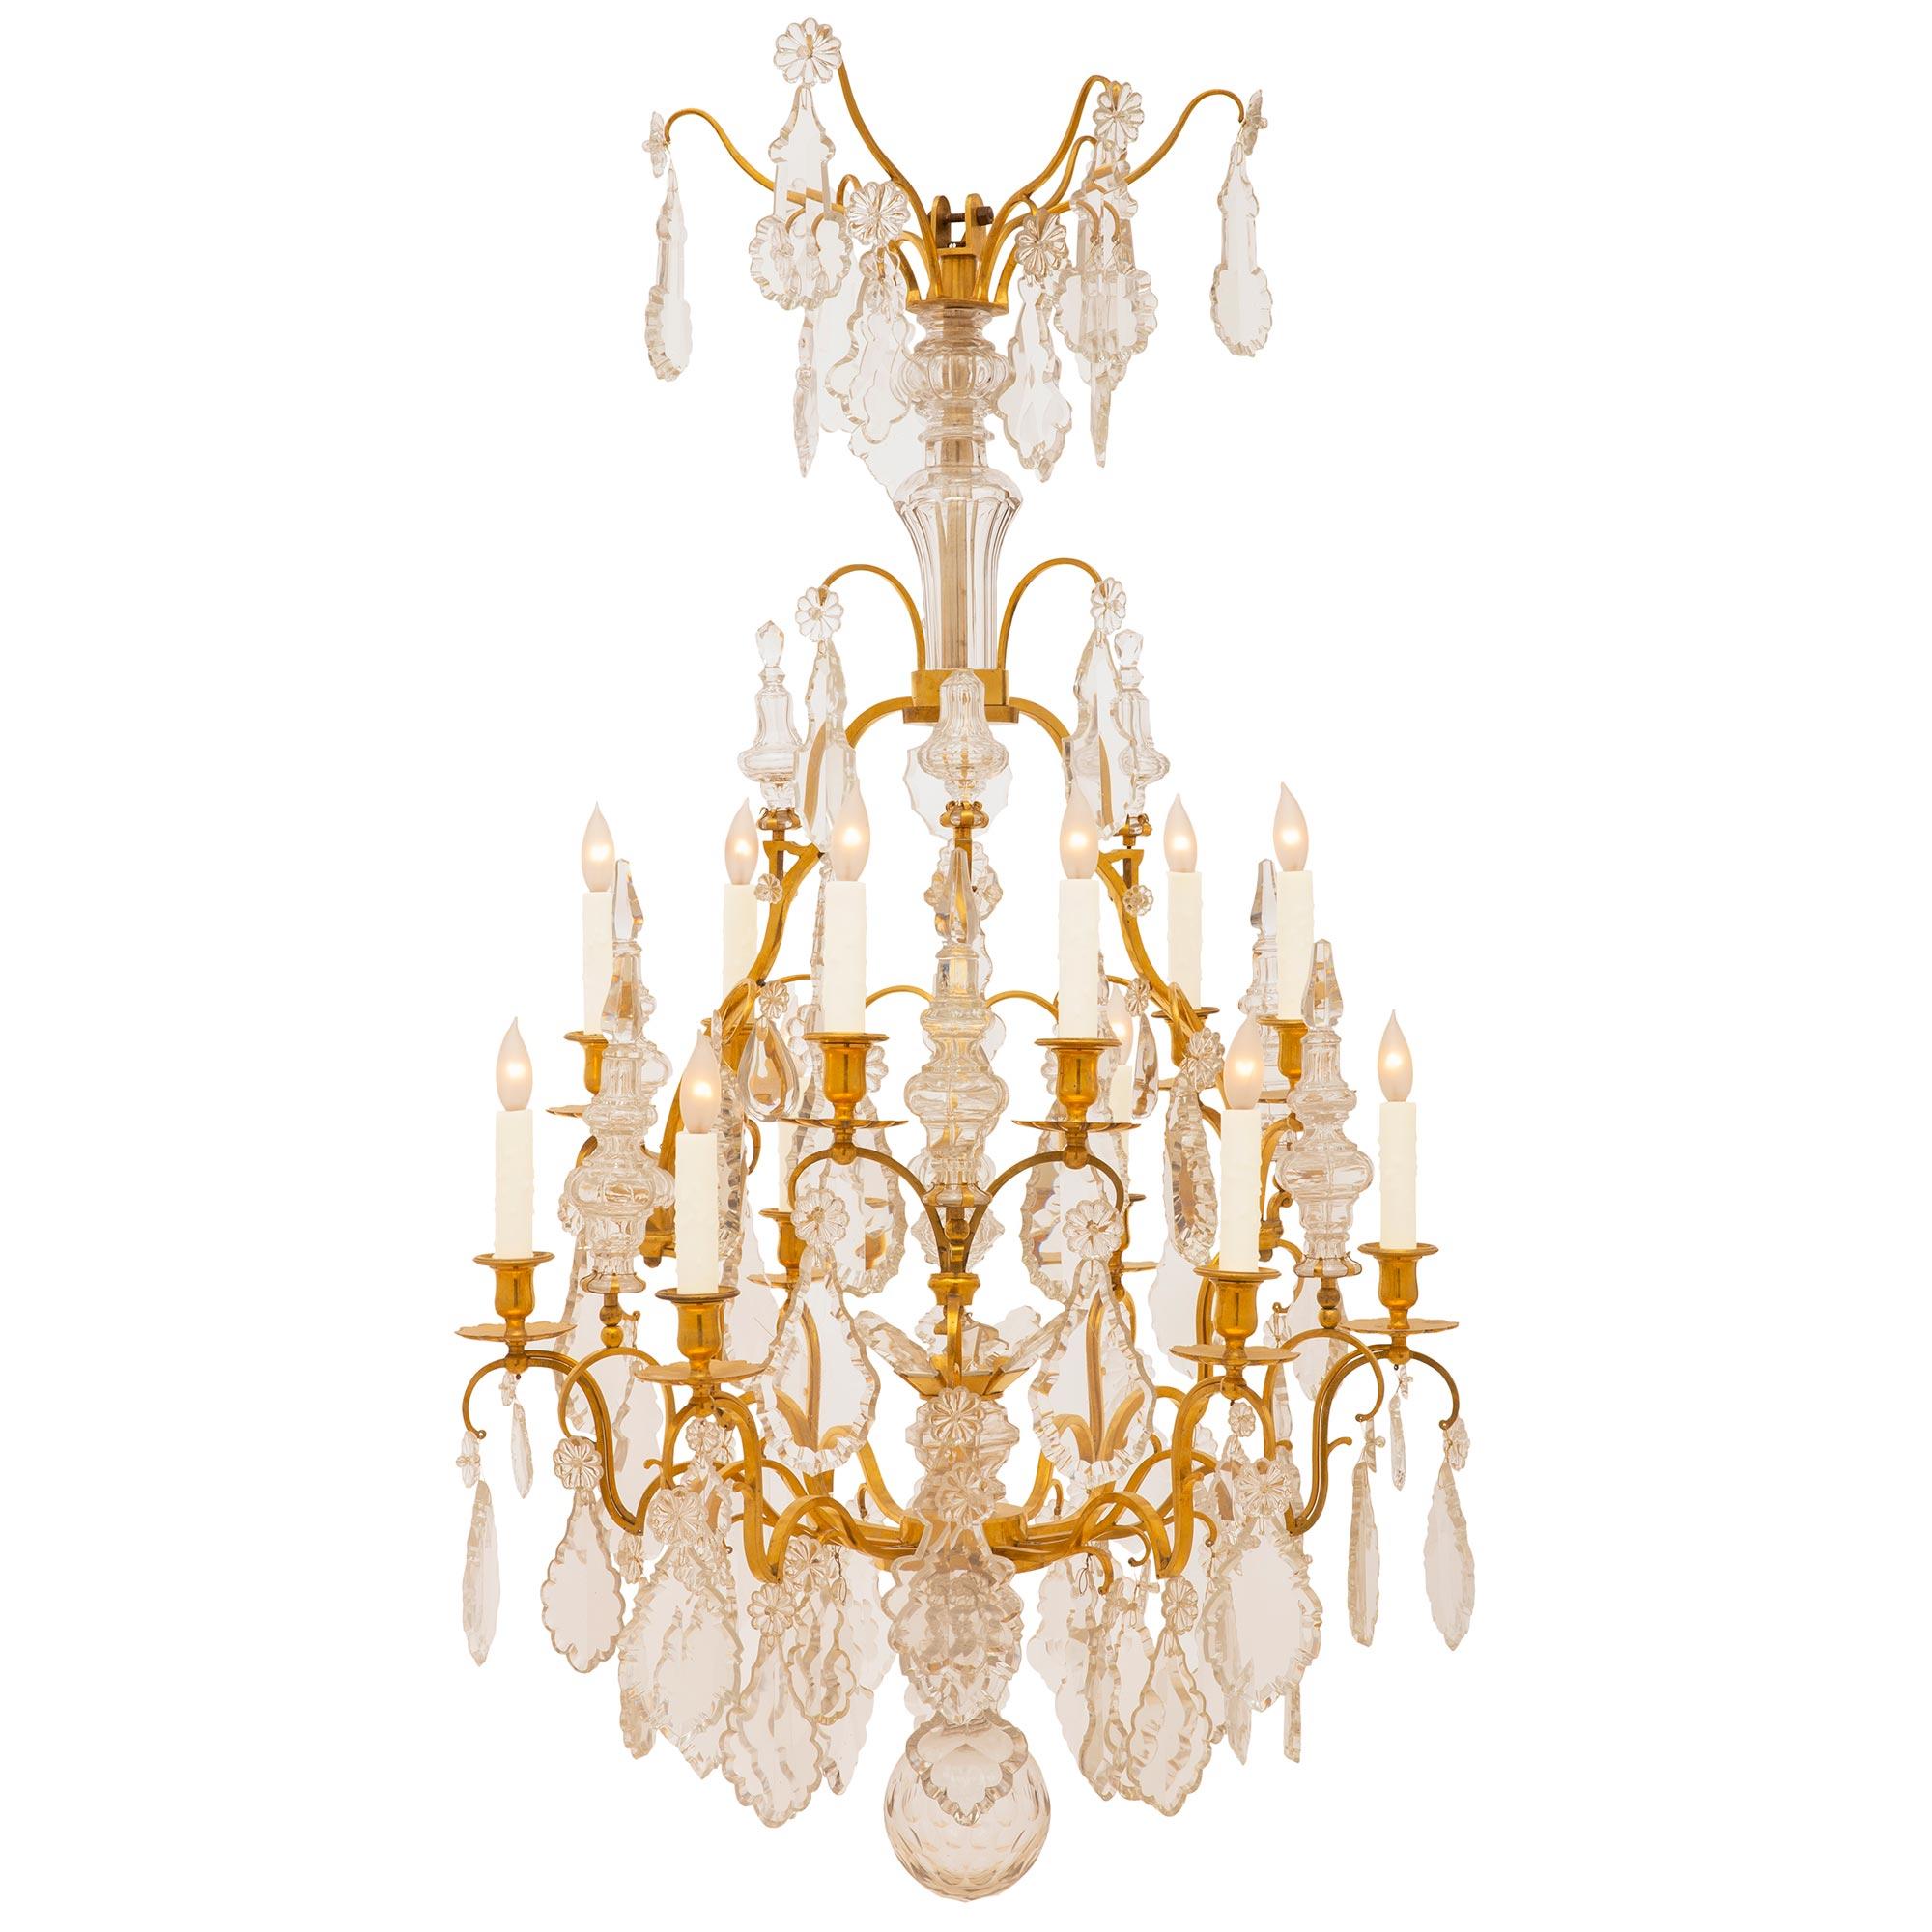 A high quality French 19th century Louis XV st. ormolu and Baccarat crystal chandelier. The twelve light chandelier has impressive scrolling ormolu arms decorated by elegant and finely cut crystals throughout. Each arm ends with an ormolu bobeche or